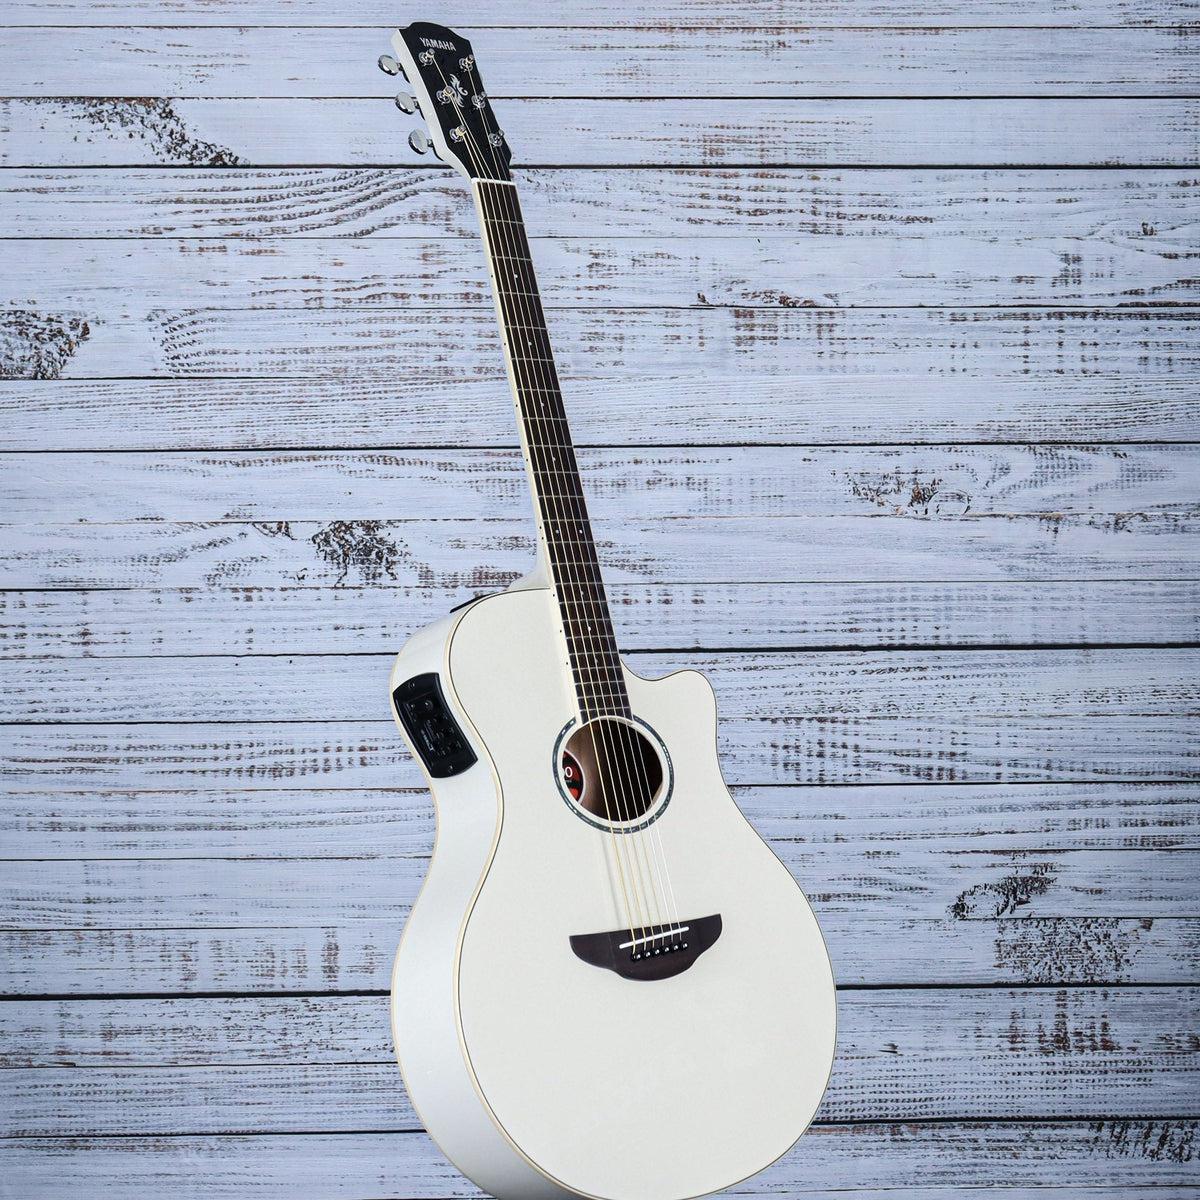 Yamaha APX600 Acoustic Electric Guitar – Vintage White